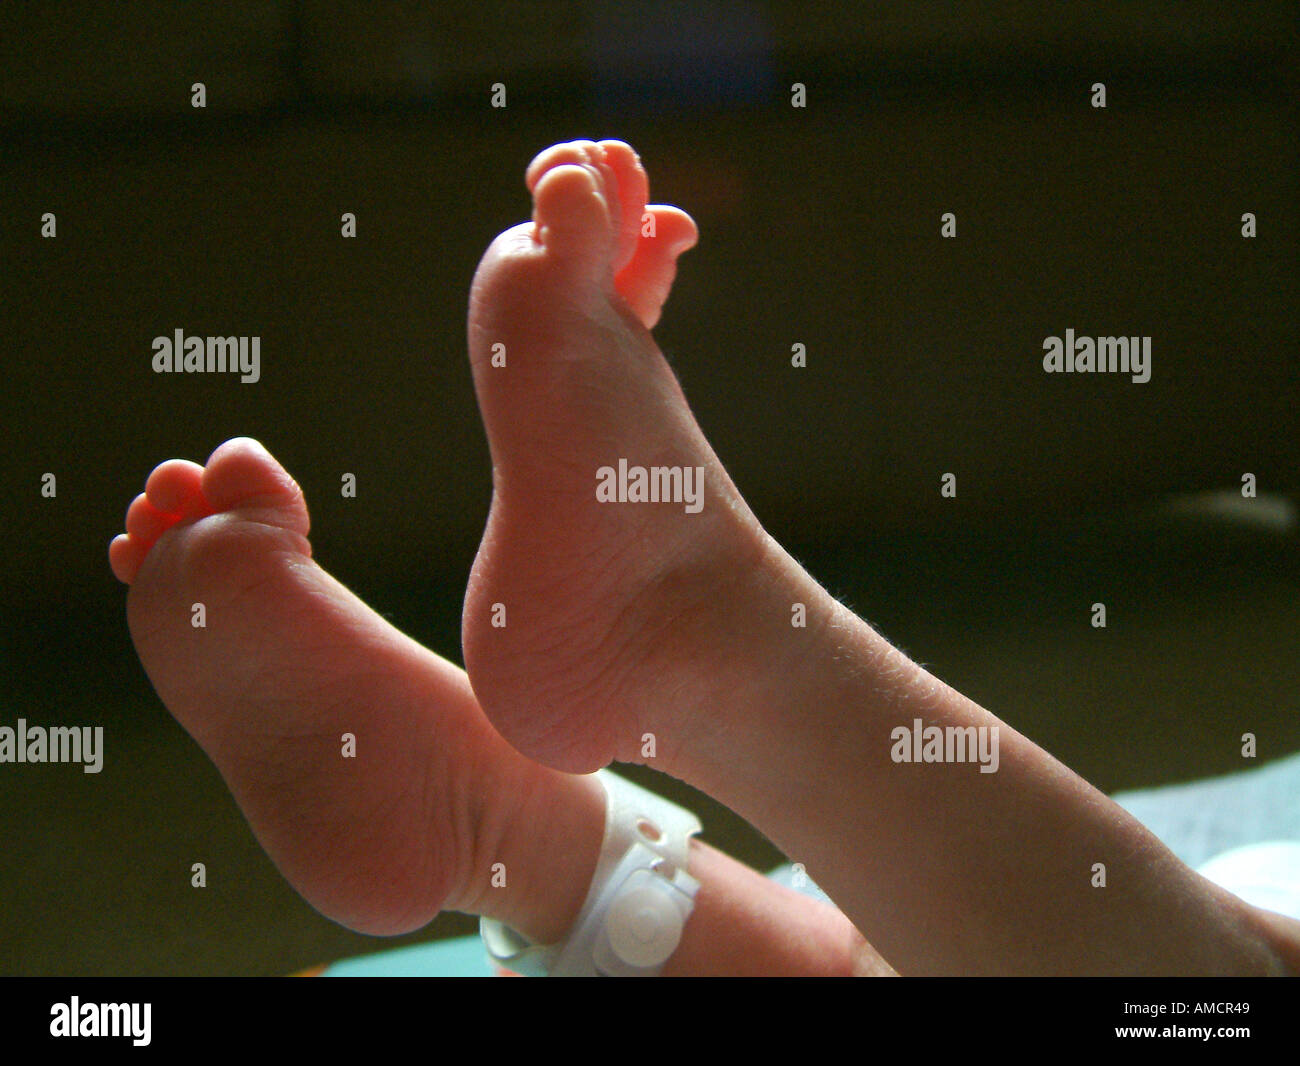 A photograph of a premature babys feet and legs. Stock Photo